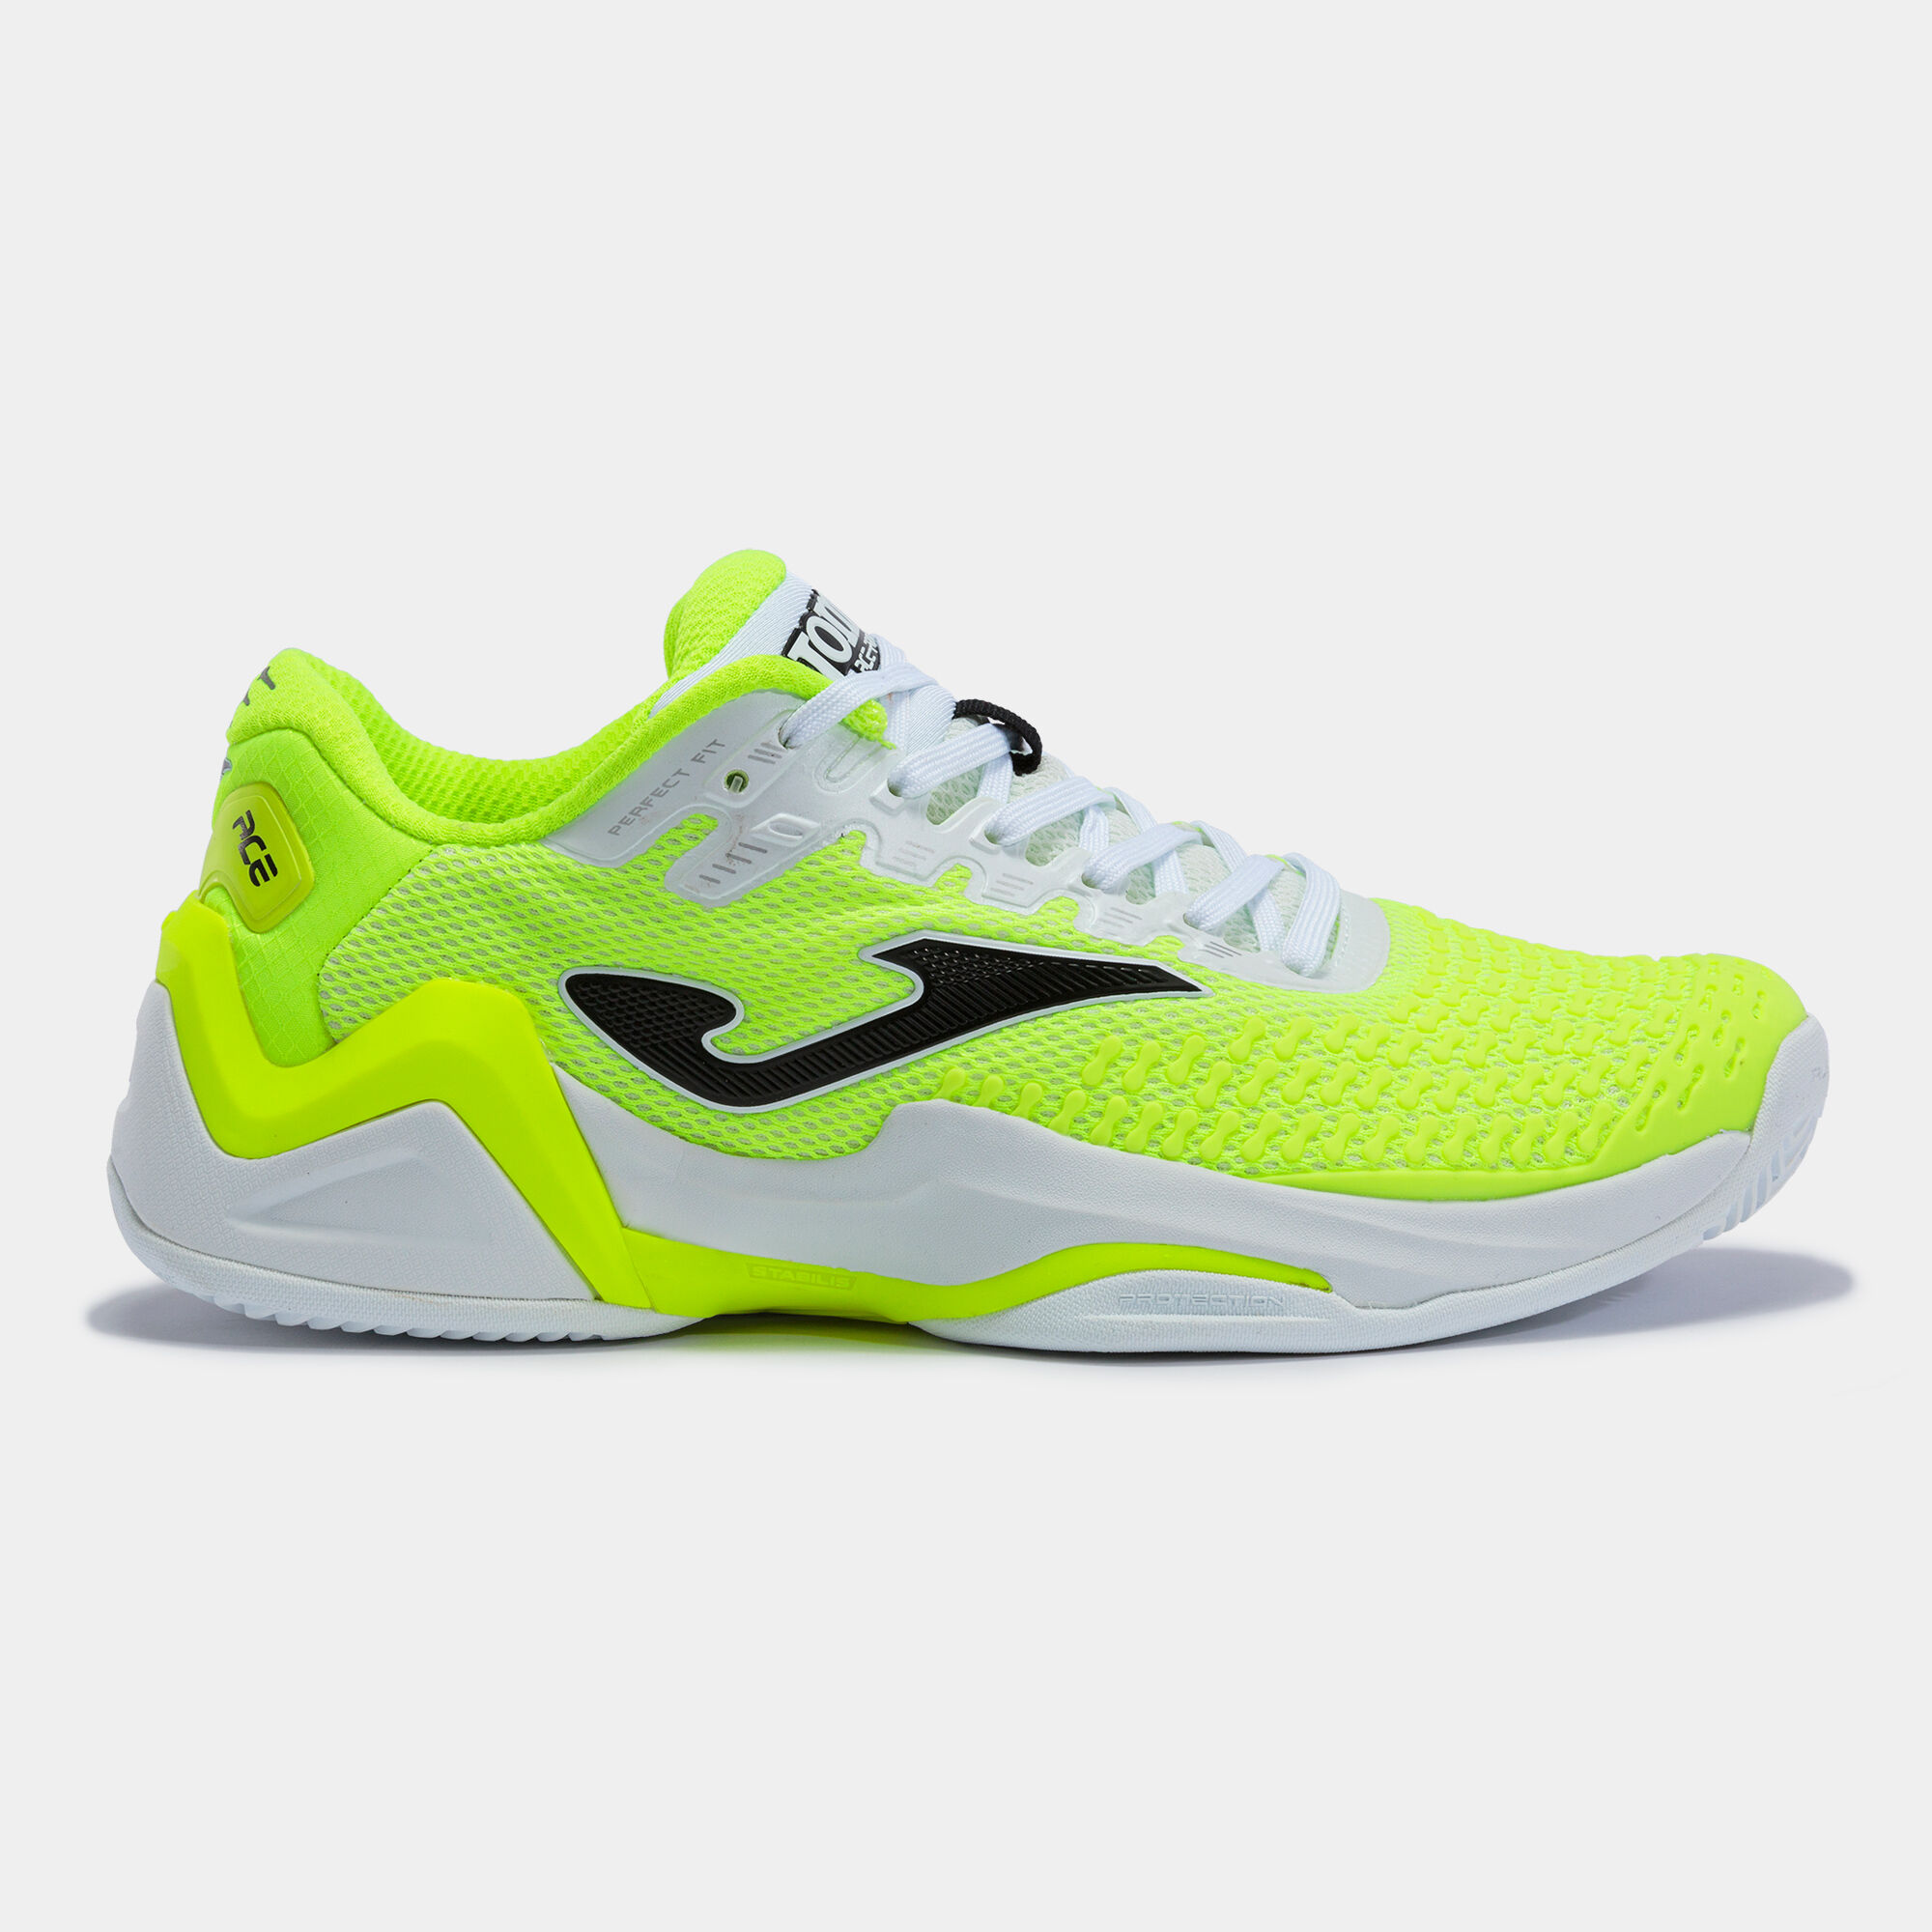 CHAUSSURES ACE PRO 21 TERRE BATTUE HOMME JAUNE FLUO BLANC